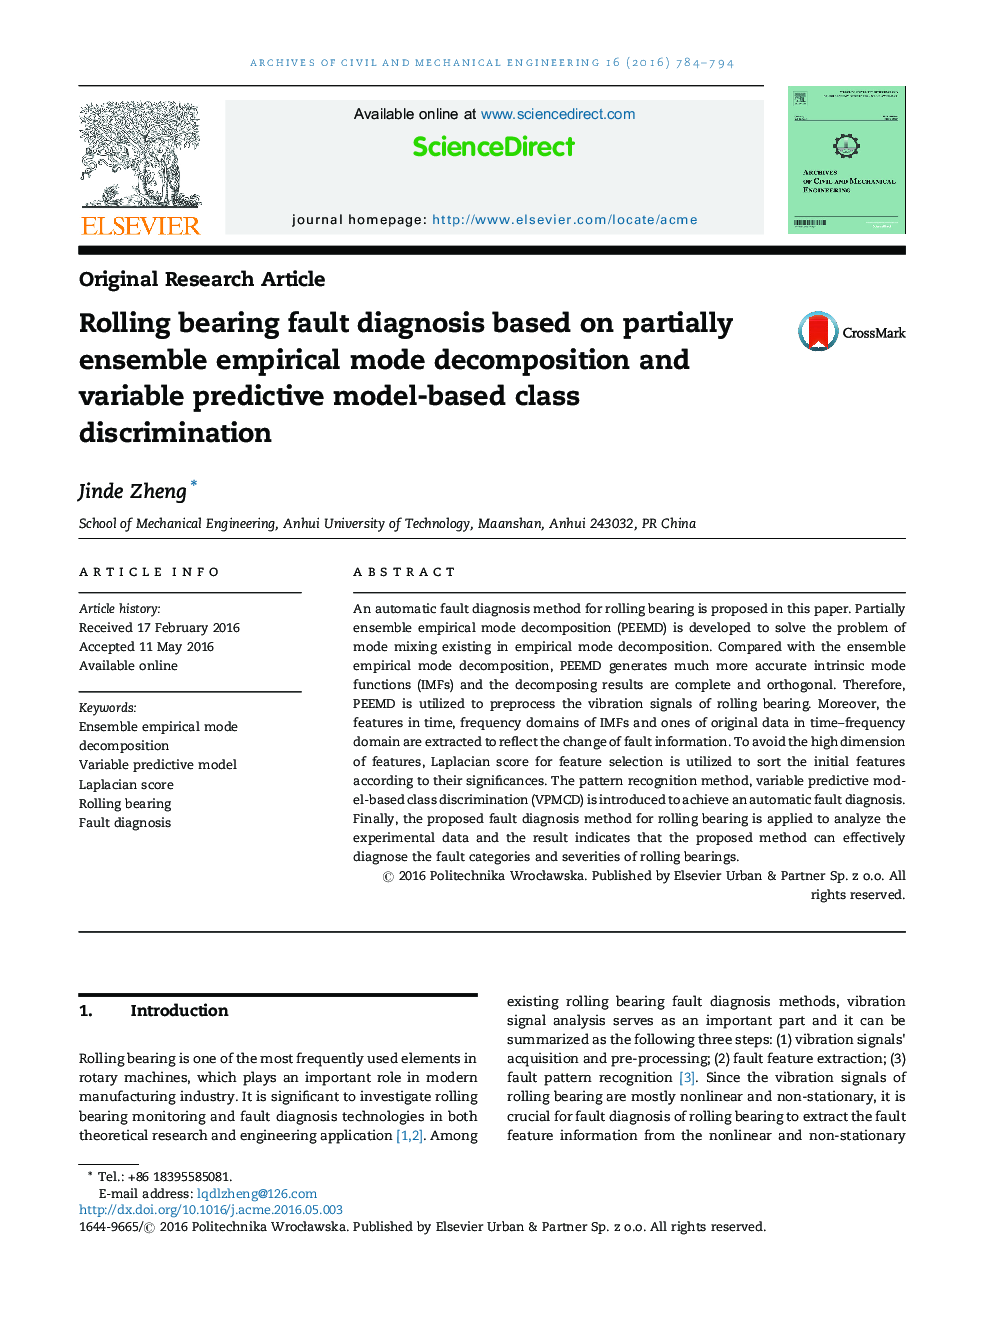 Rolling bearing fault diagnosis based on partially ensemble empirical mode decomposition and variable predictive model-based class discrimination